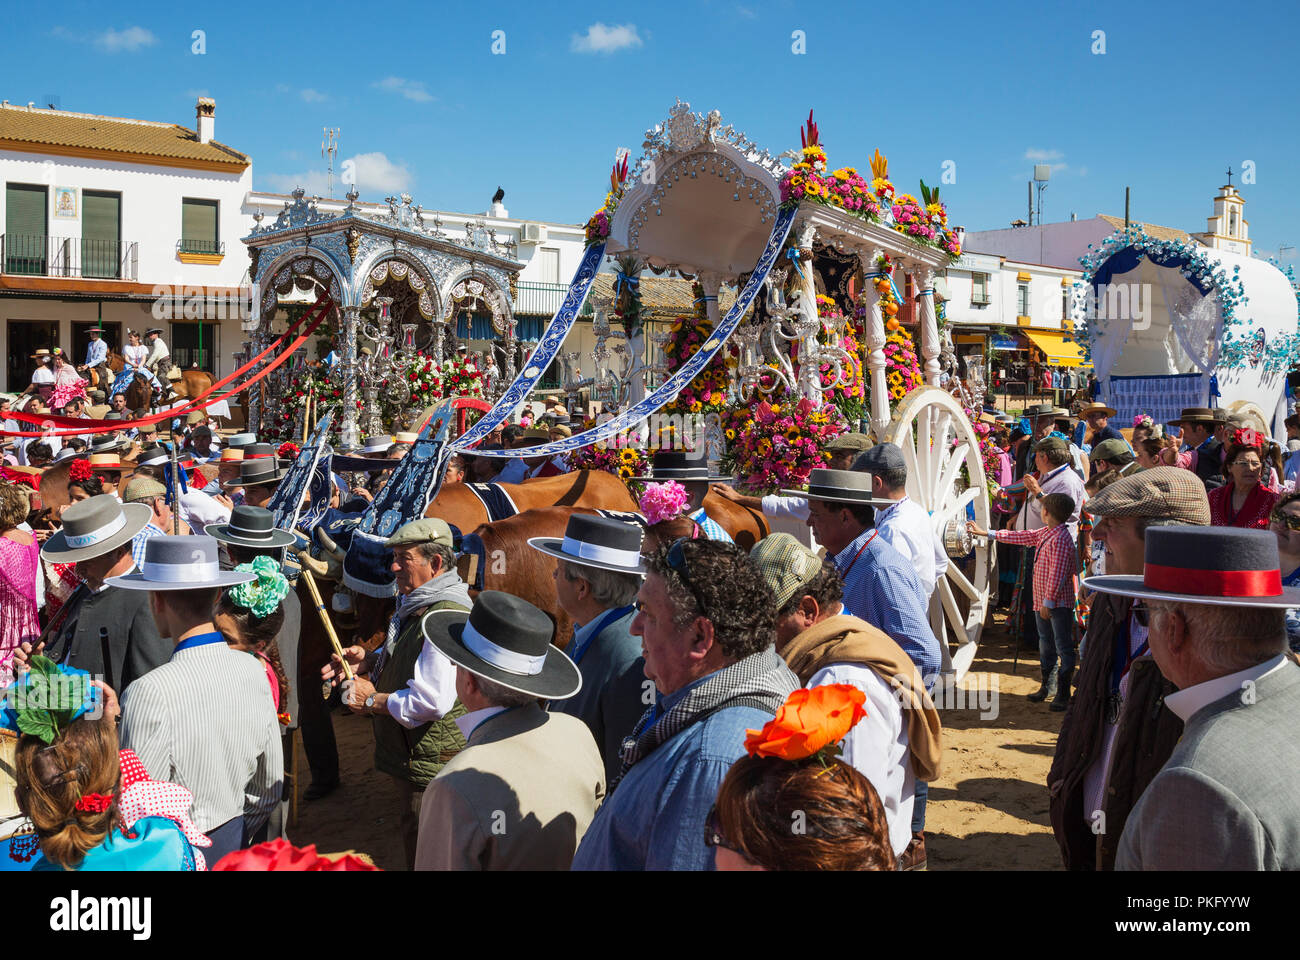 Decorated oxcarts, people in traditional clothes, Pentecost pilgrimage of El Rocio, Huelva province, Andalusia, Spain Stock Photo